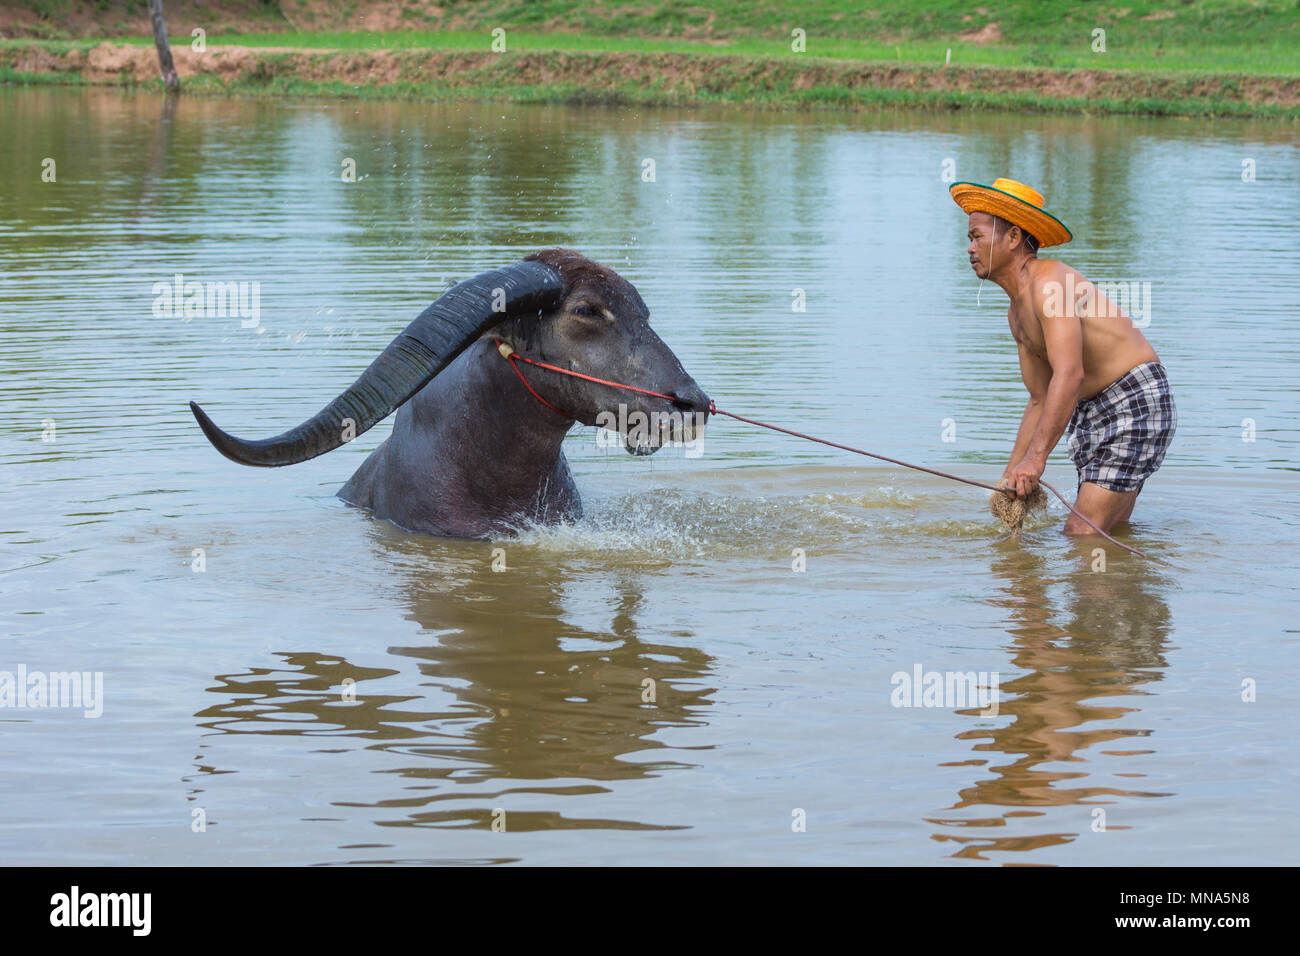 Kalasin, Thailand - May 21, 2016: Cattleman without shirt bathing buffalo with extra long horns in rural swamp in Kalasin, Thailand Stock Photo